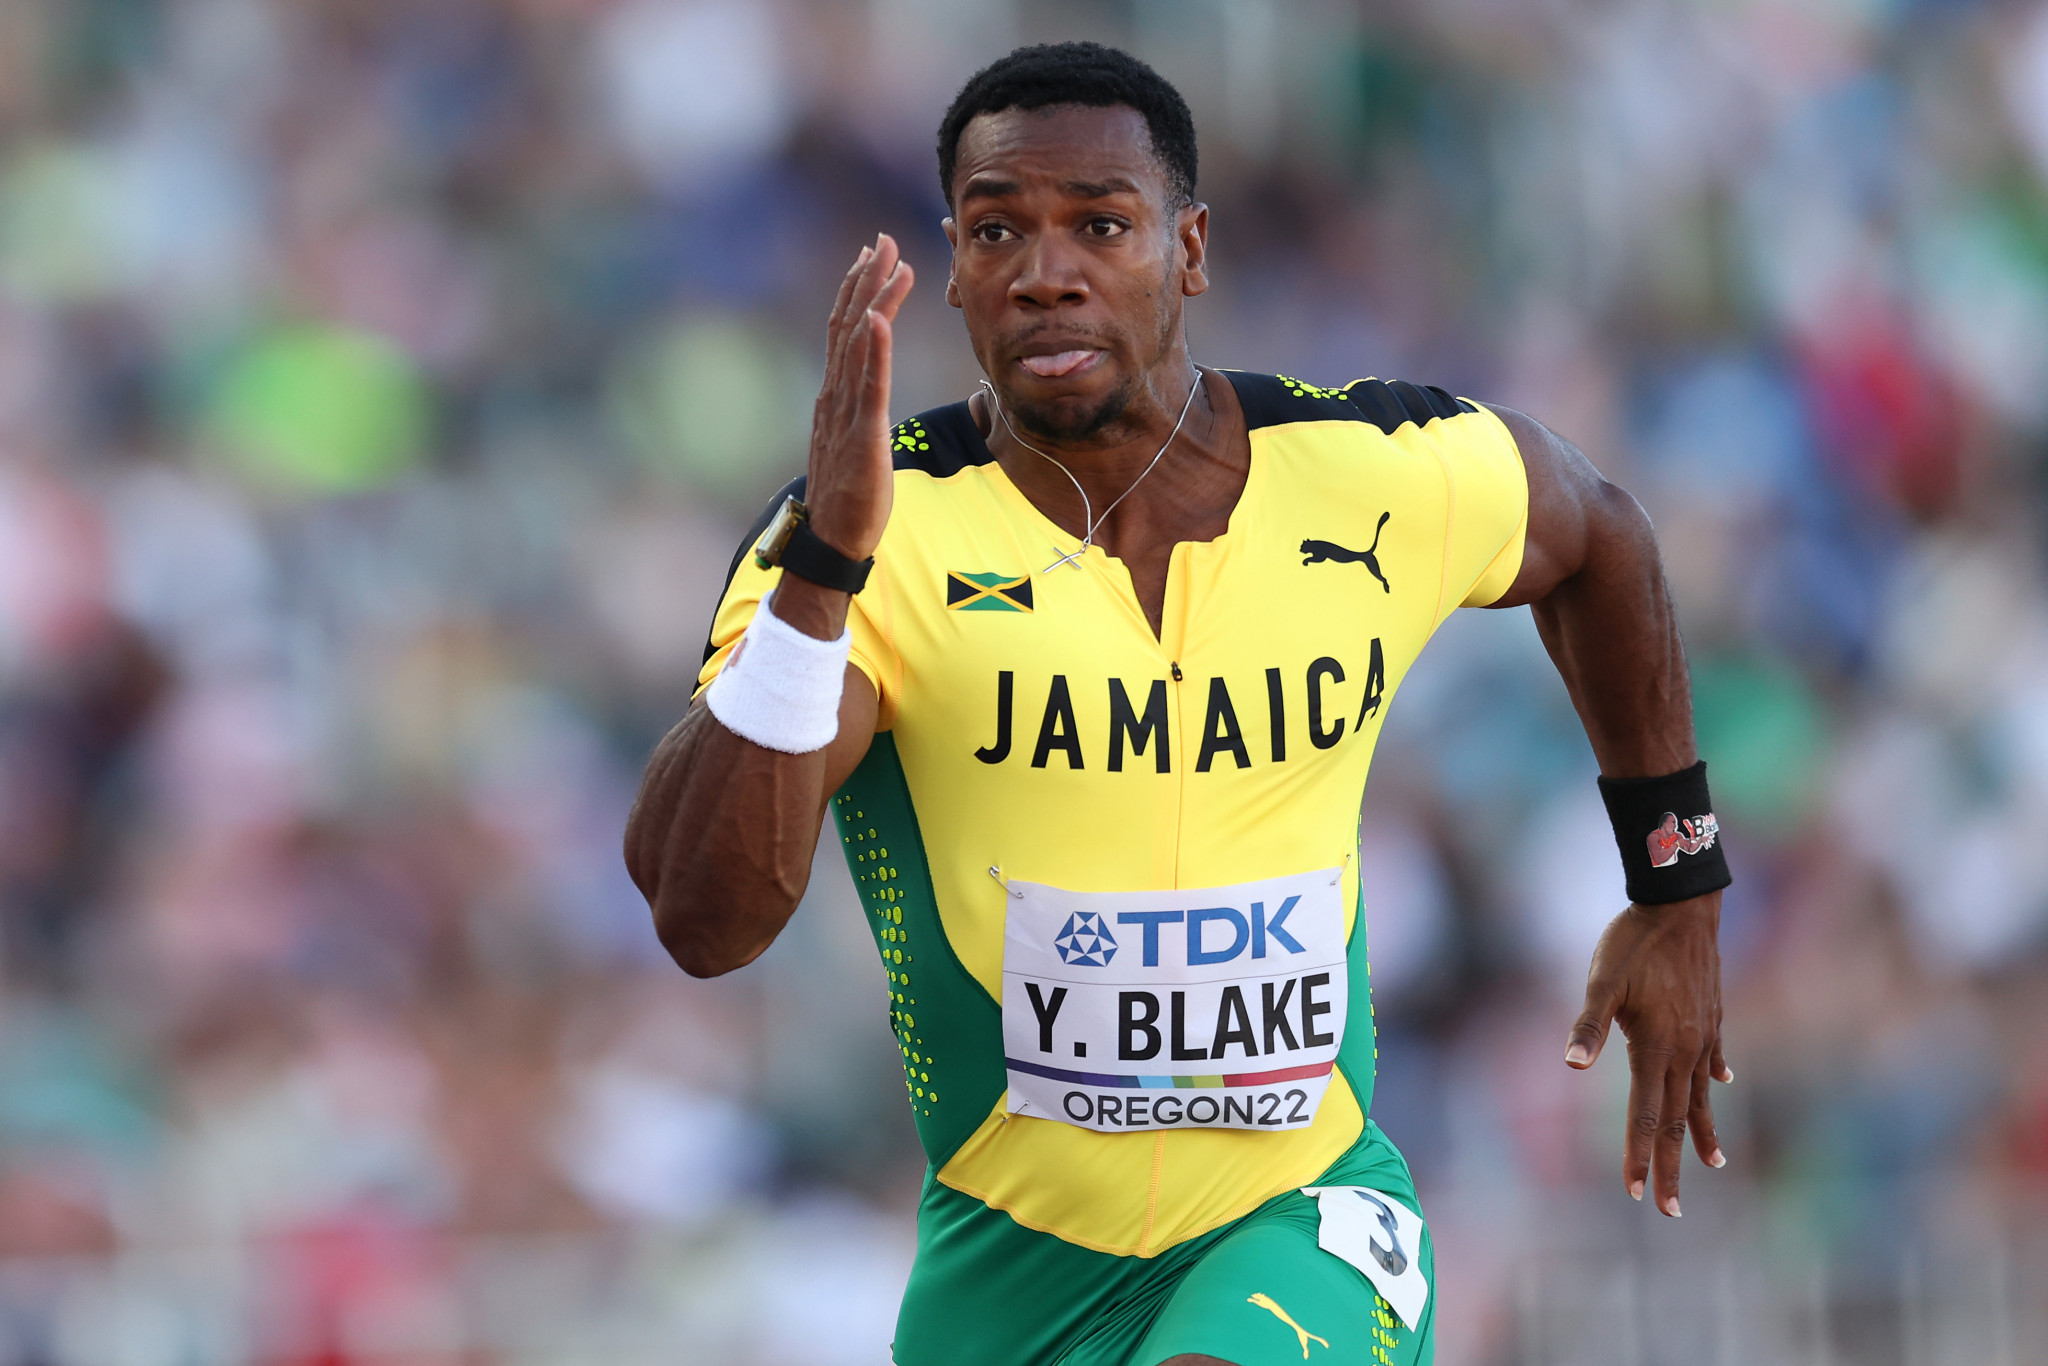 Jamaica's former world 100m champion Yohan Blake has announced he plans to retire after Paris 2024 ©Getty Images